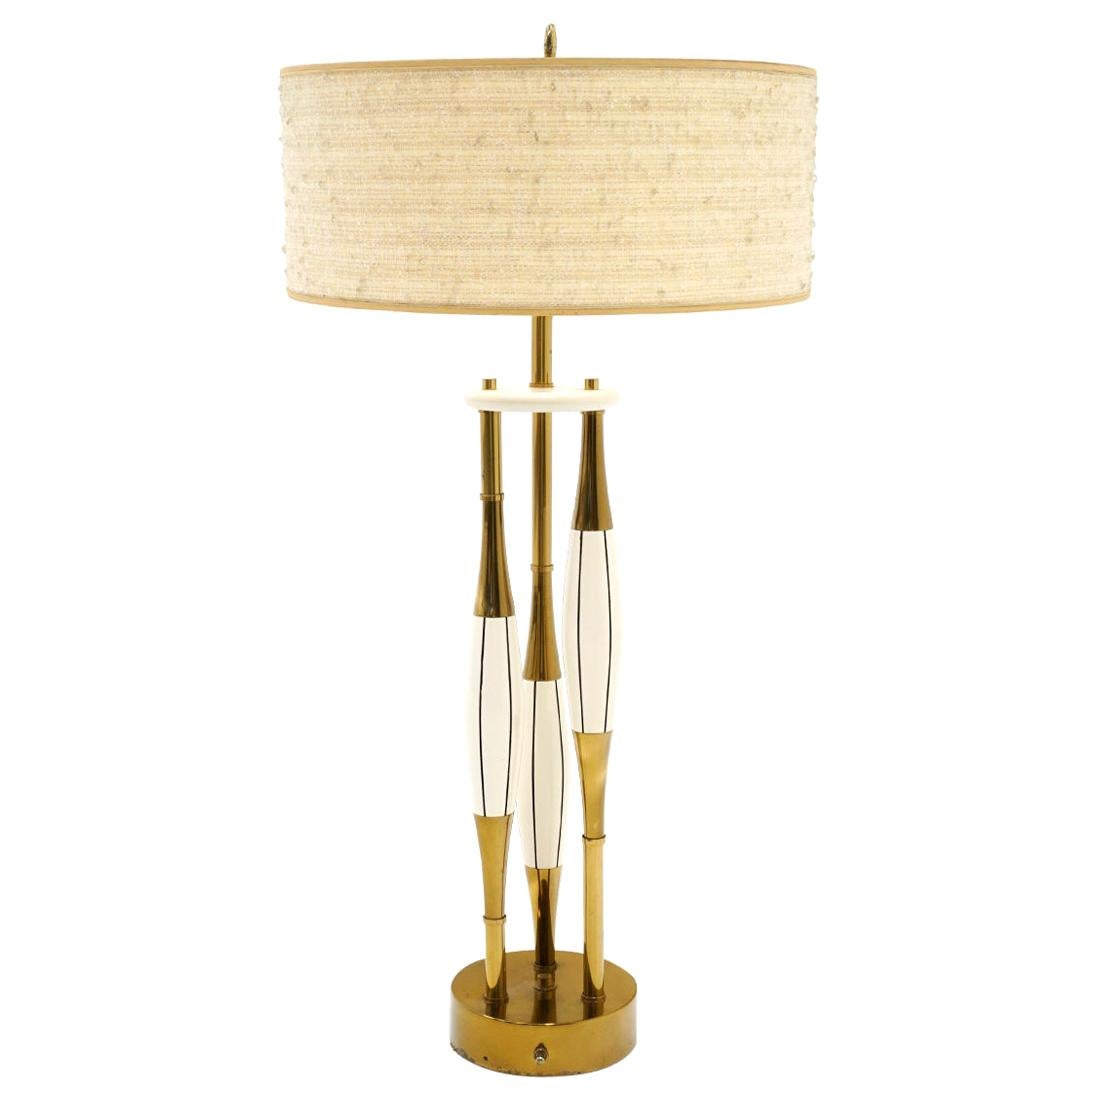 Brass & Wood Table Lamp by Stewart Ross James, White, Black Lines Original Shade